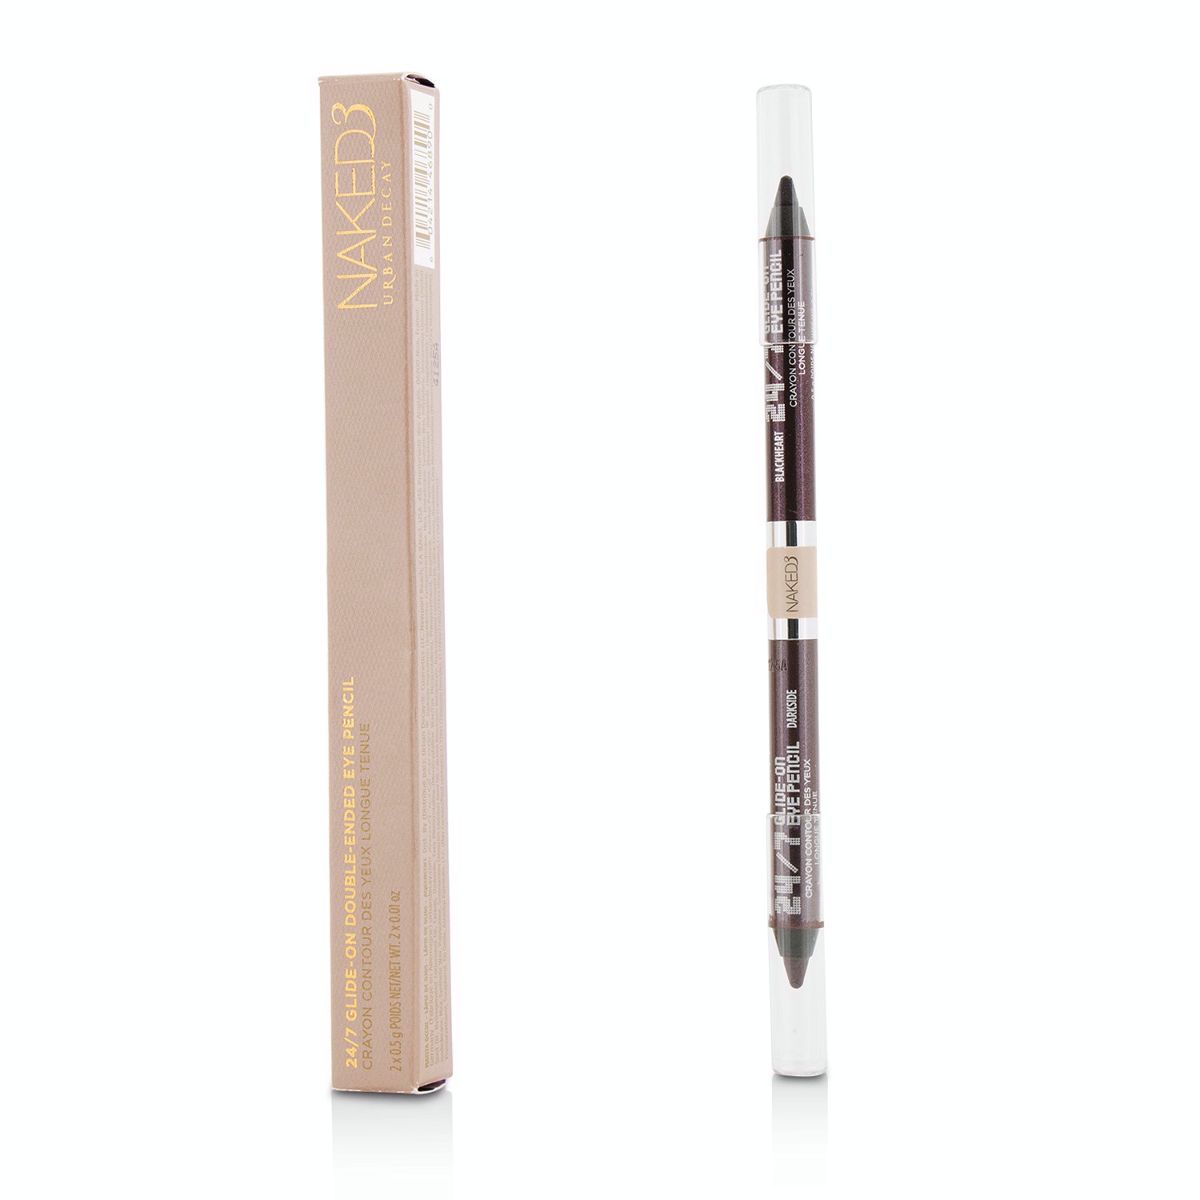 24/7 Glide On Double Ended Eye Pencil - Naked 3 (Darkside/Blackheart) Urban Decay Image